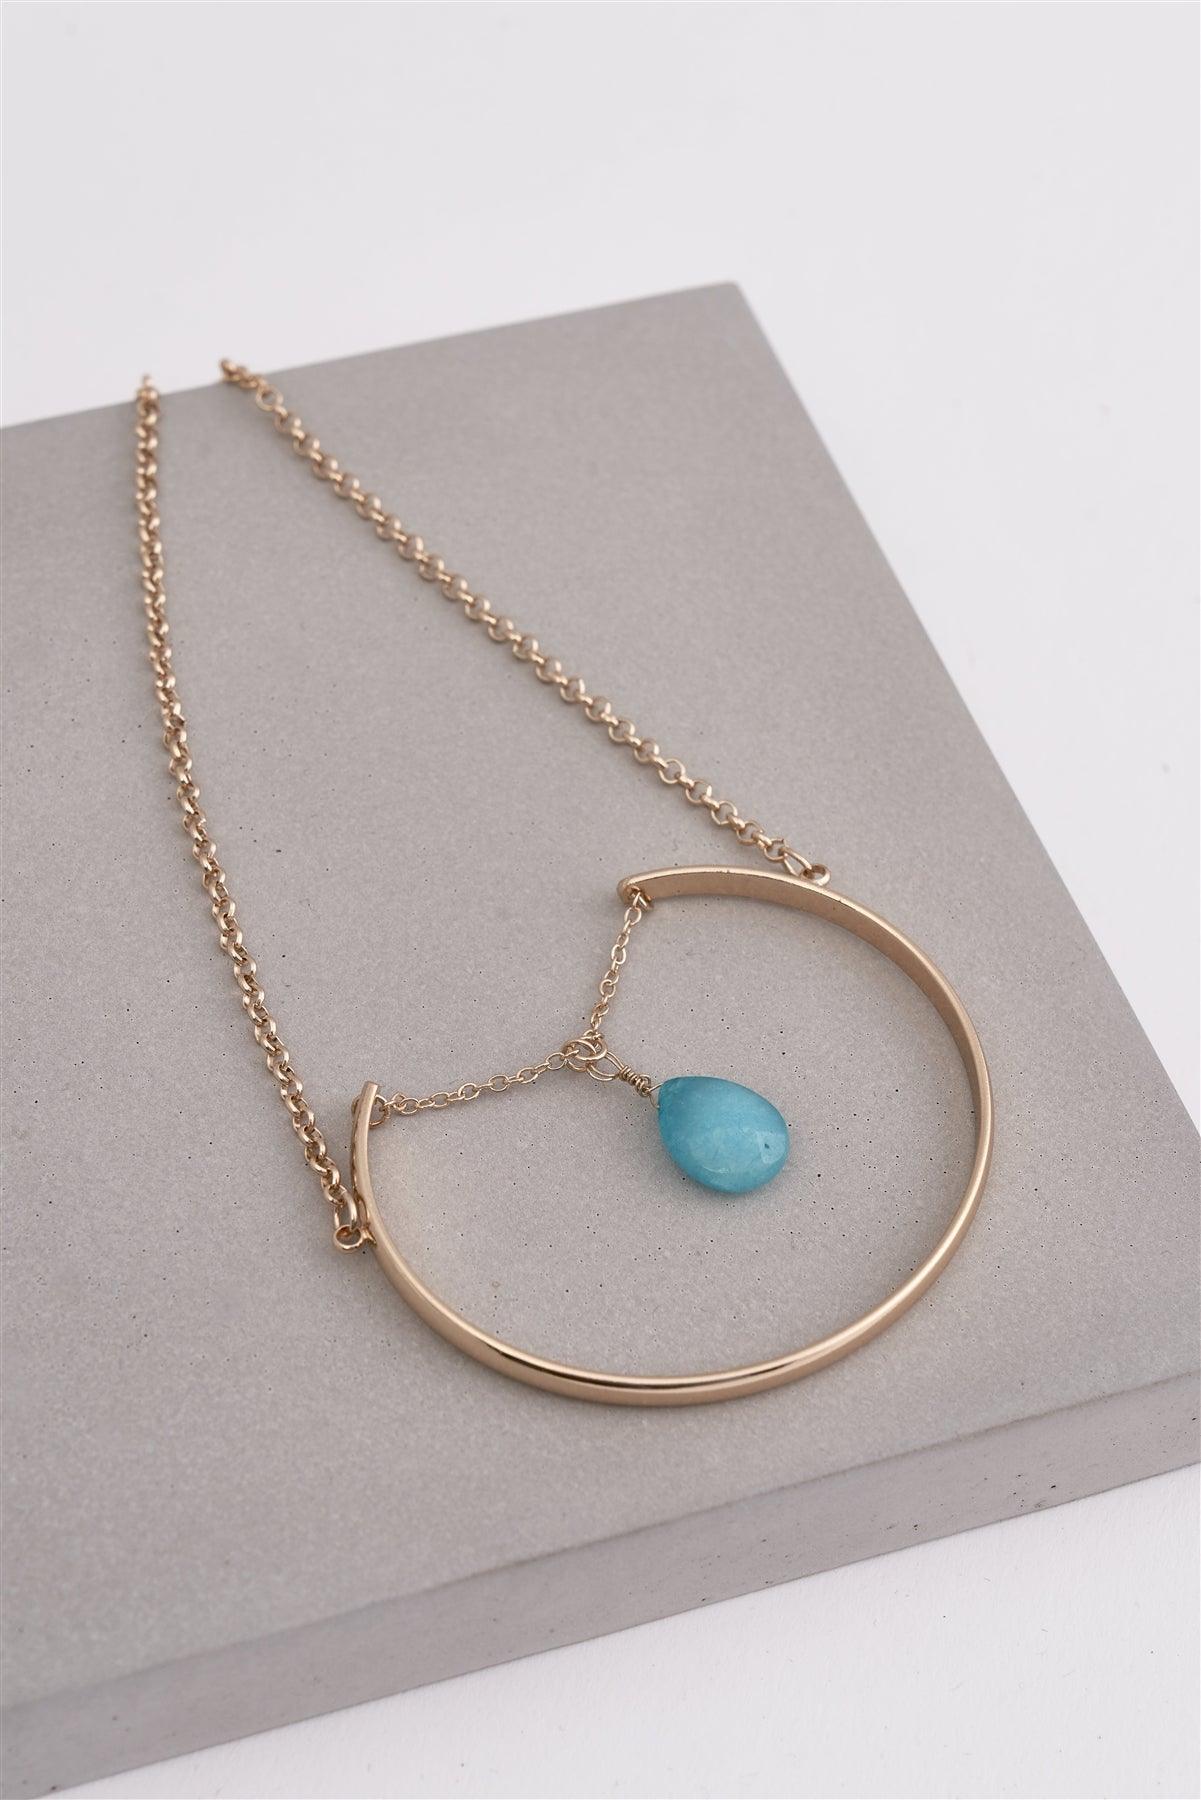 Gold & Turquoise Precious Teardrop Stone Necklace / 12 pieces